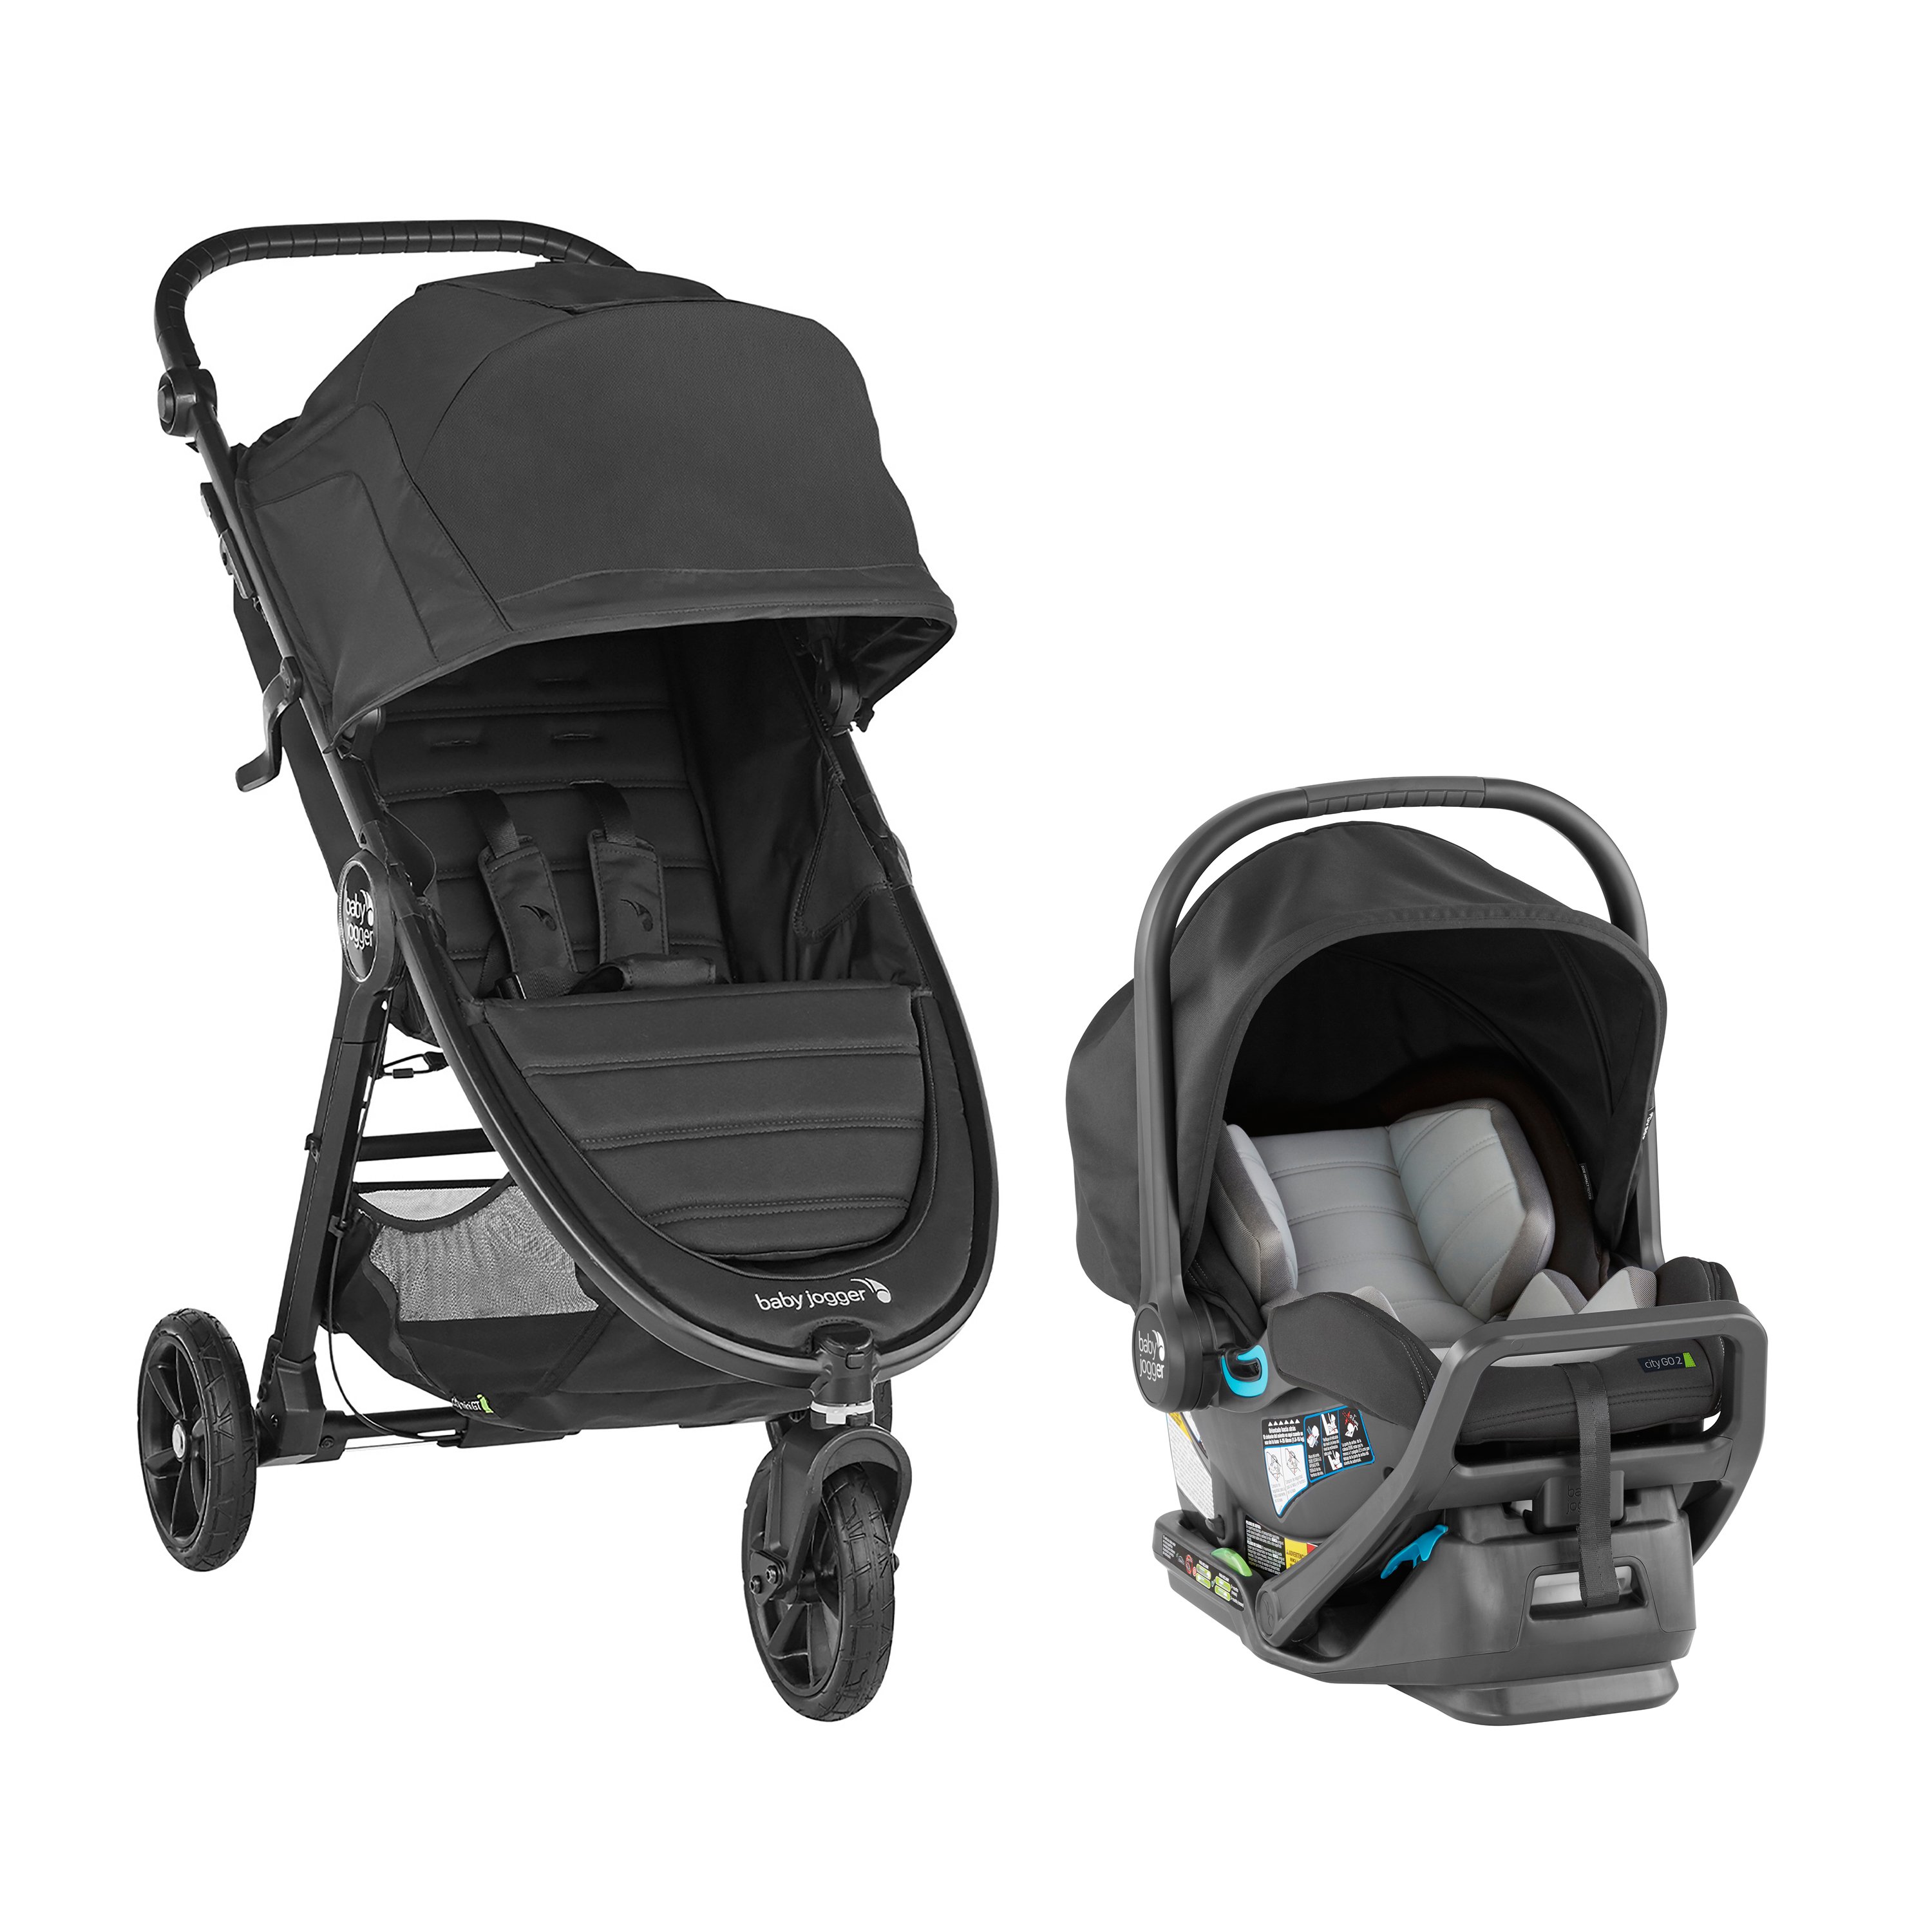 Baby Jogger City Mini Gt2 Travel, City Mini Gt Stroller With Car Seat